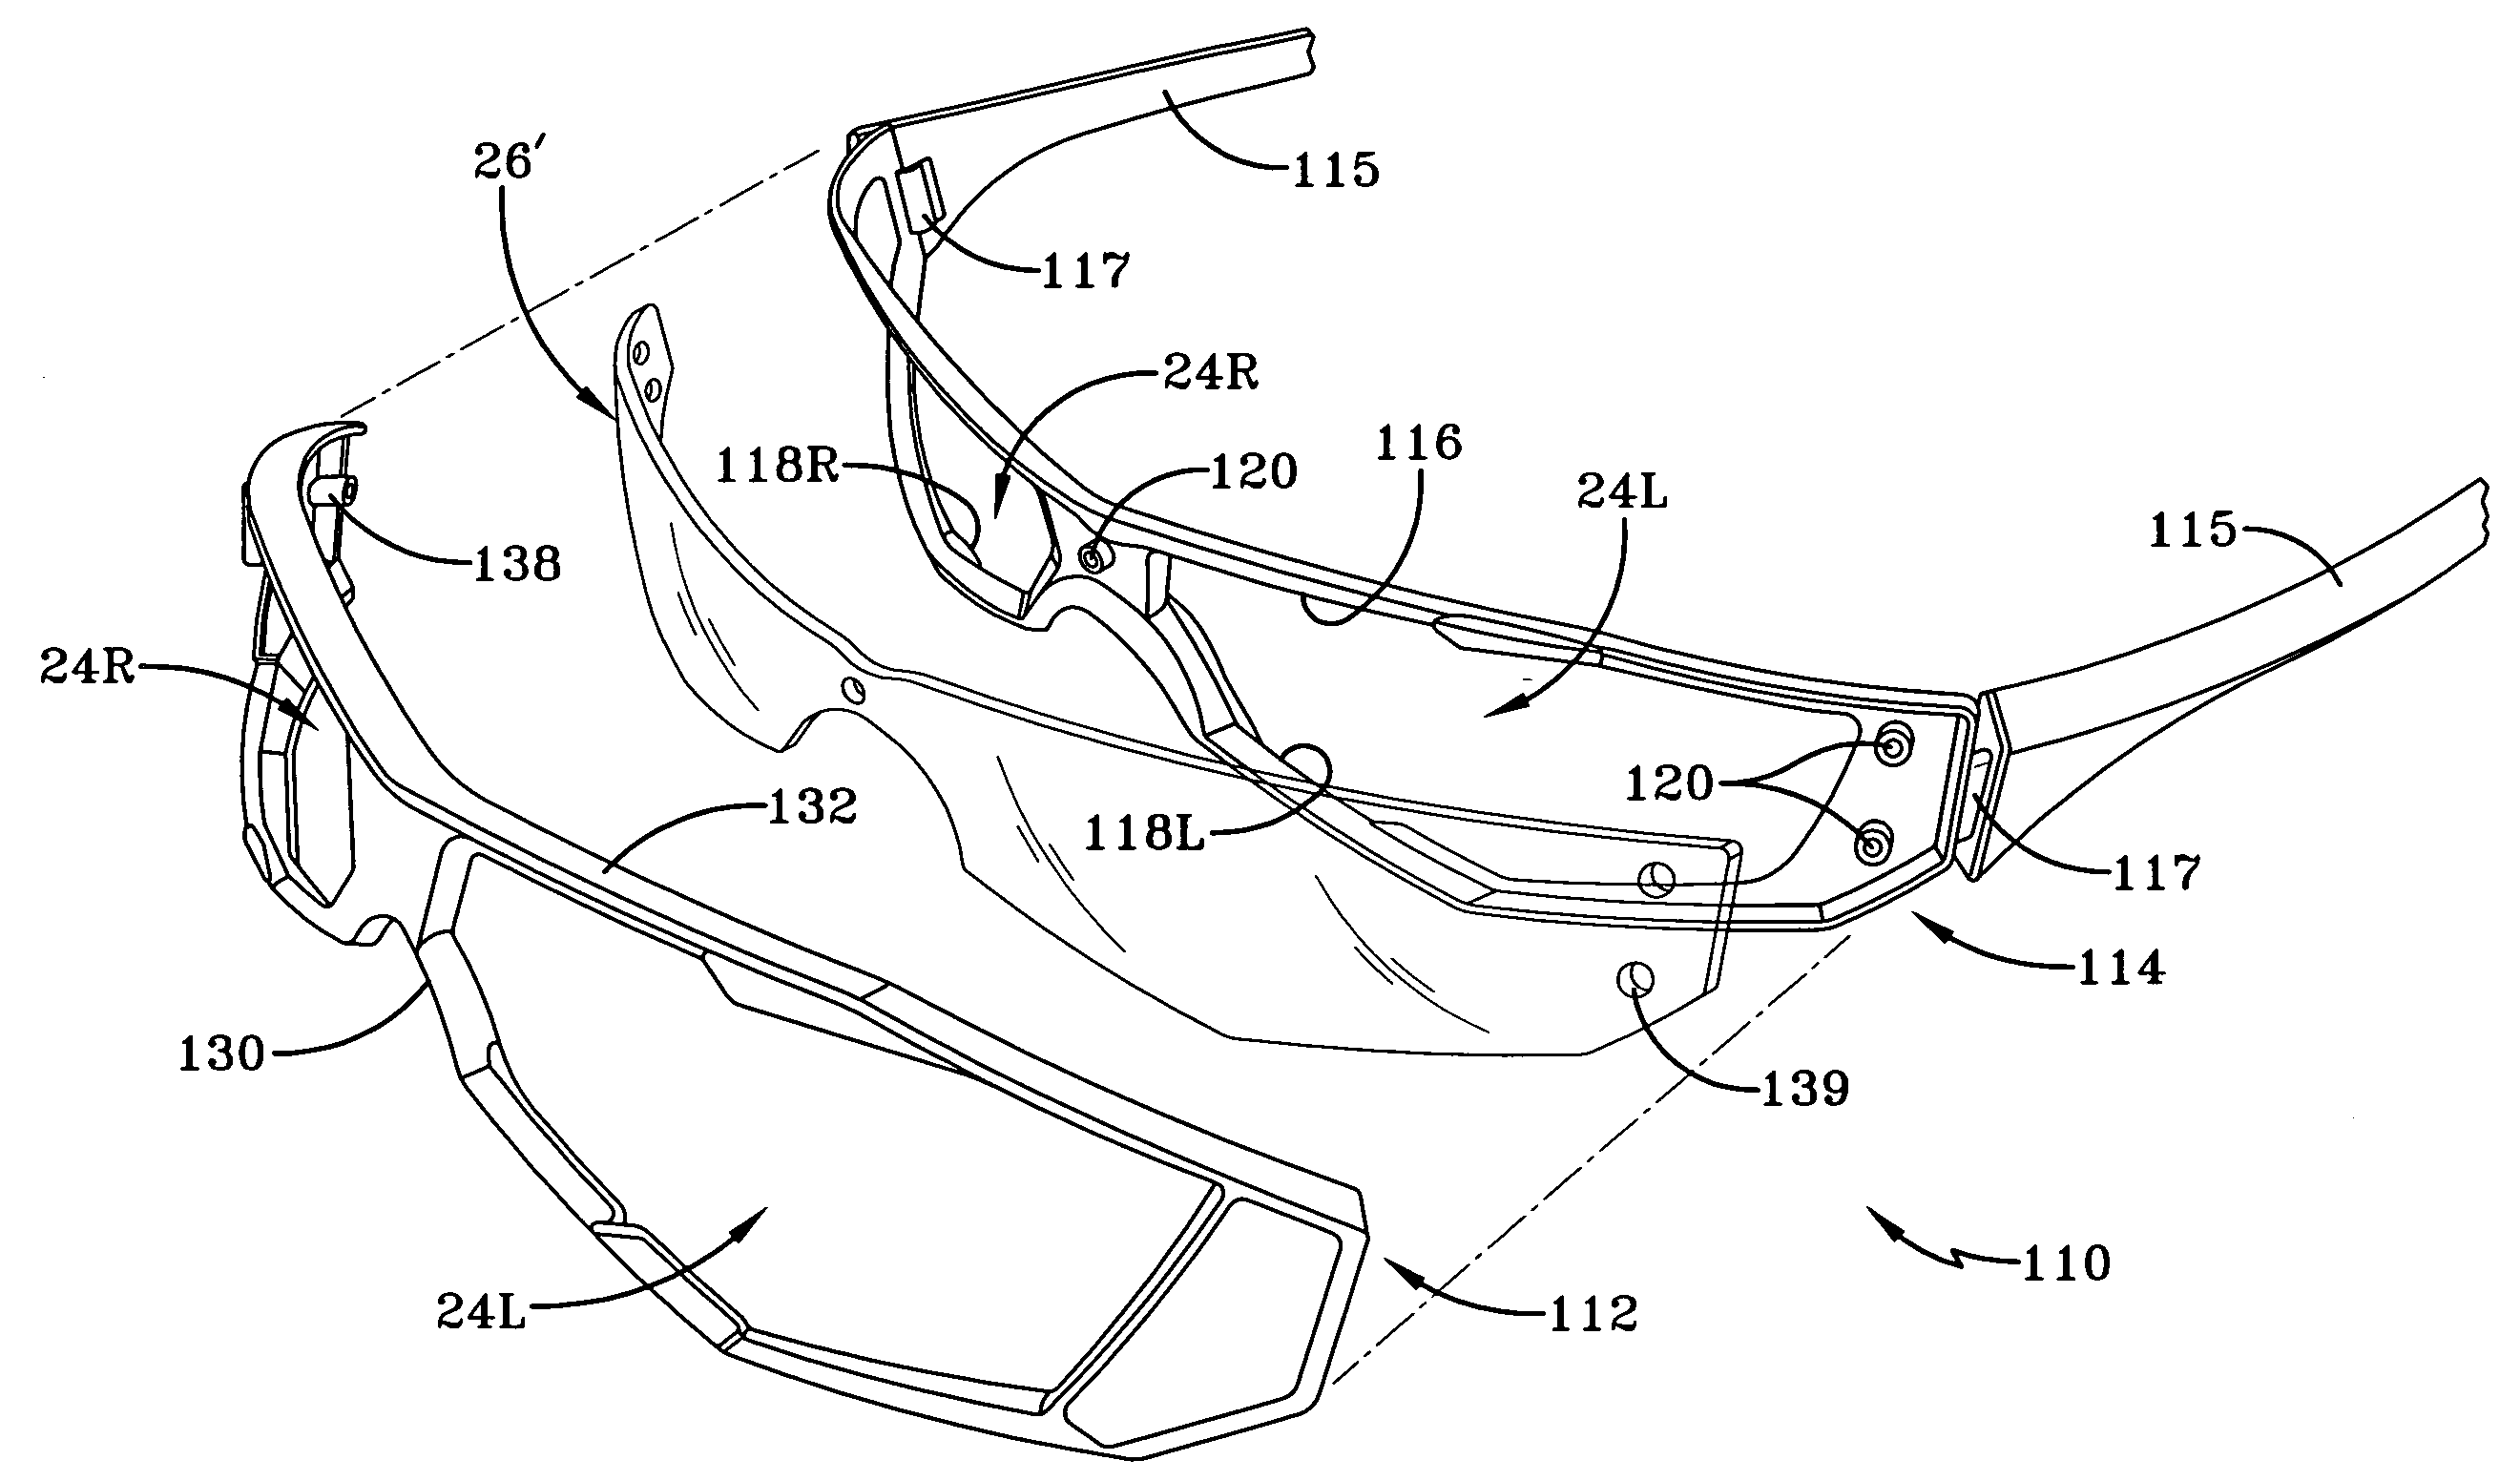 Eyewear incorporating lenses with electronically variable optical properties